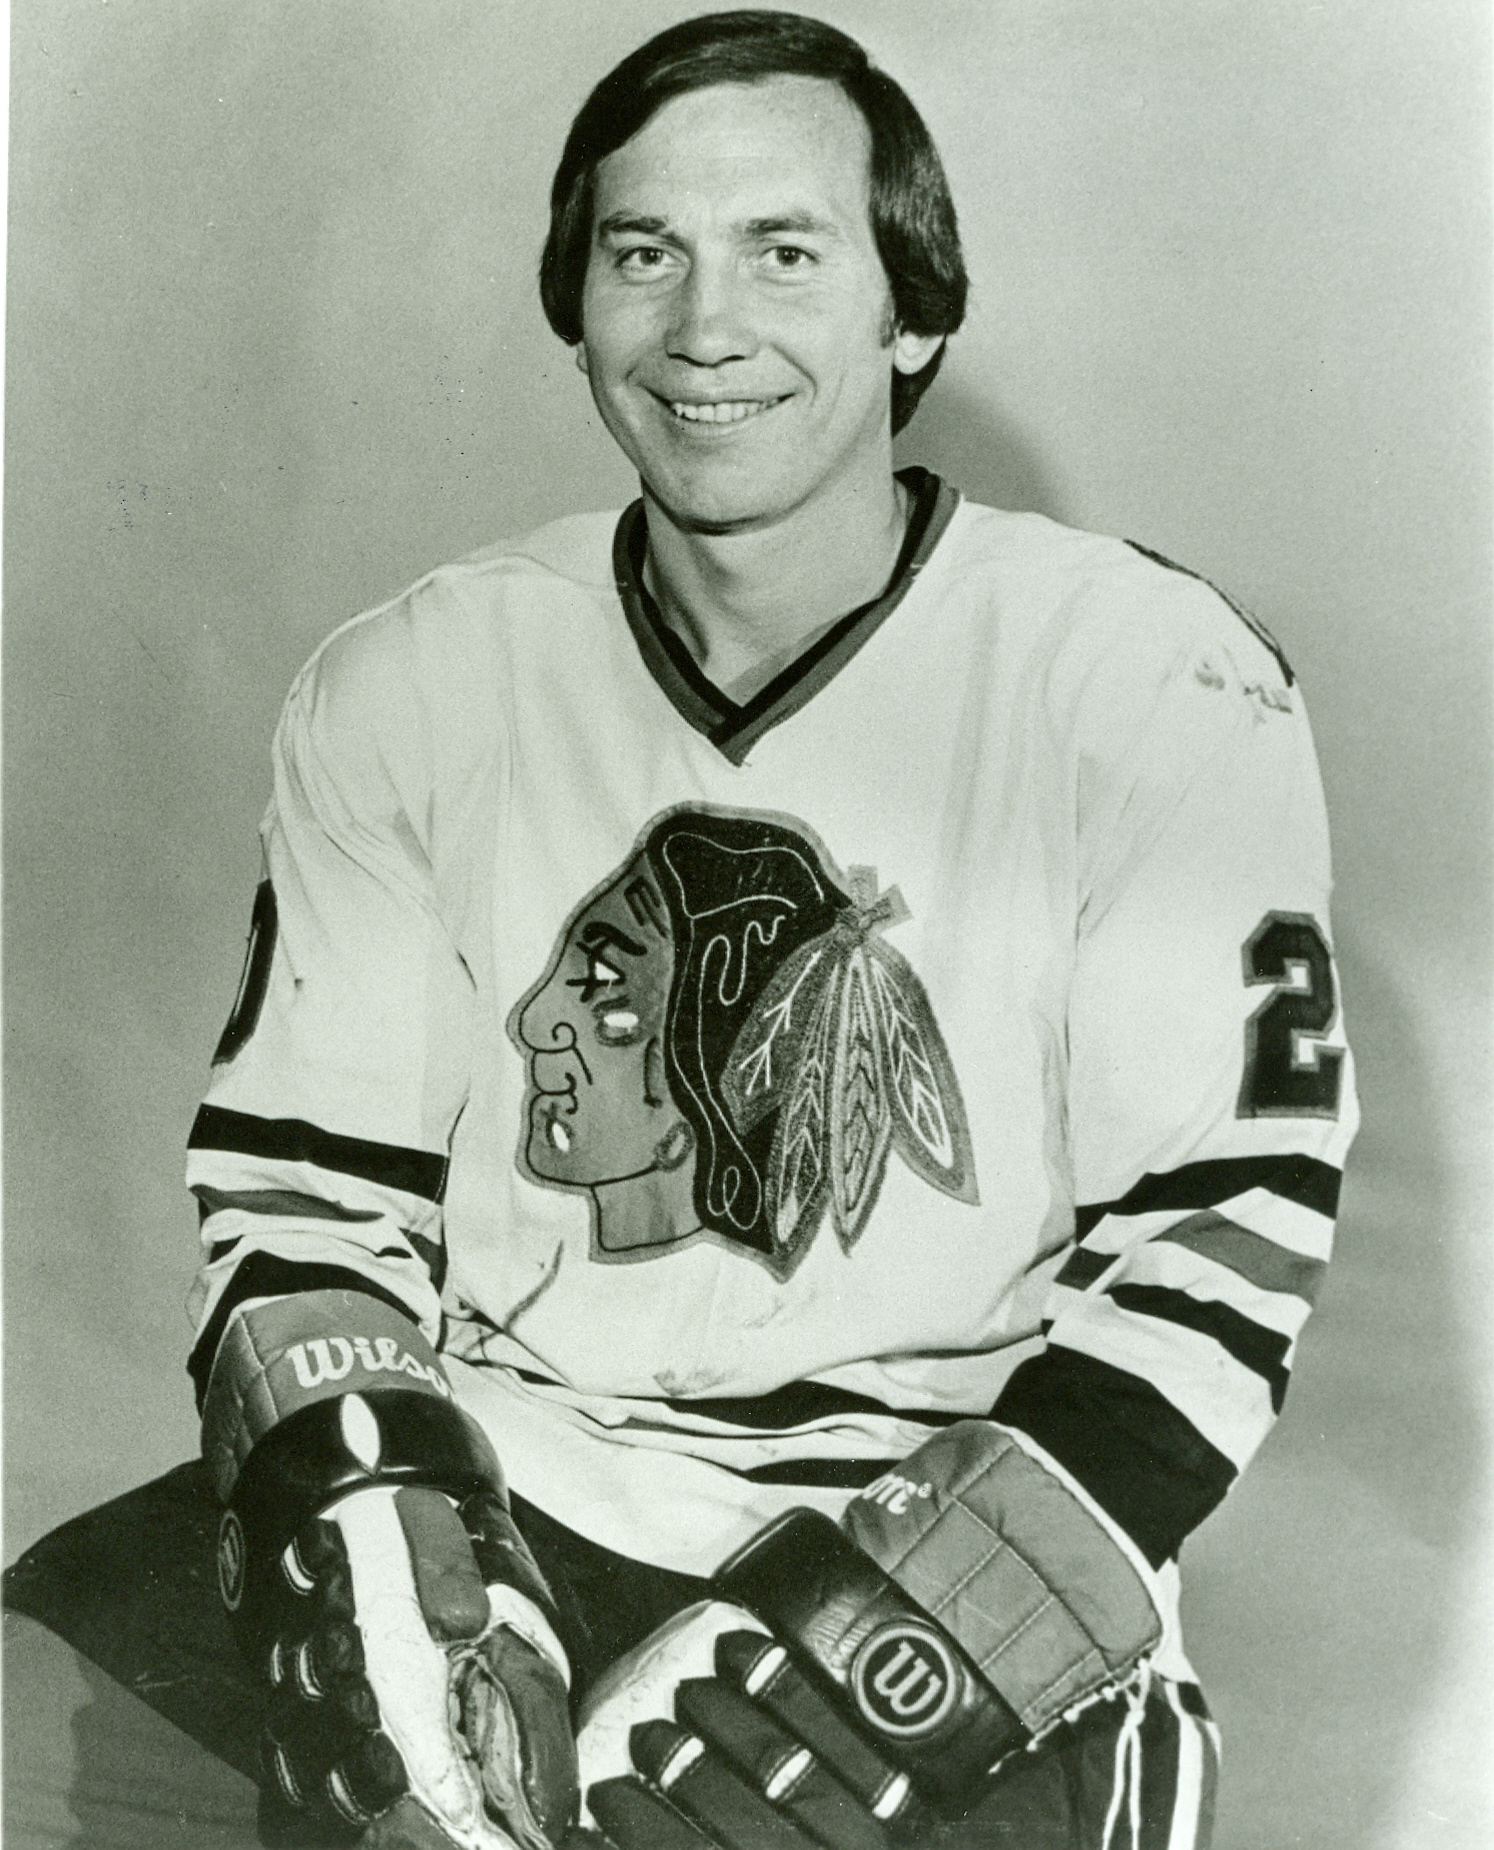 Cliff Koroll Hockey Stats and Profile at